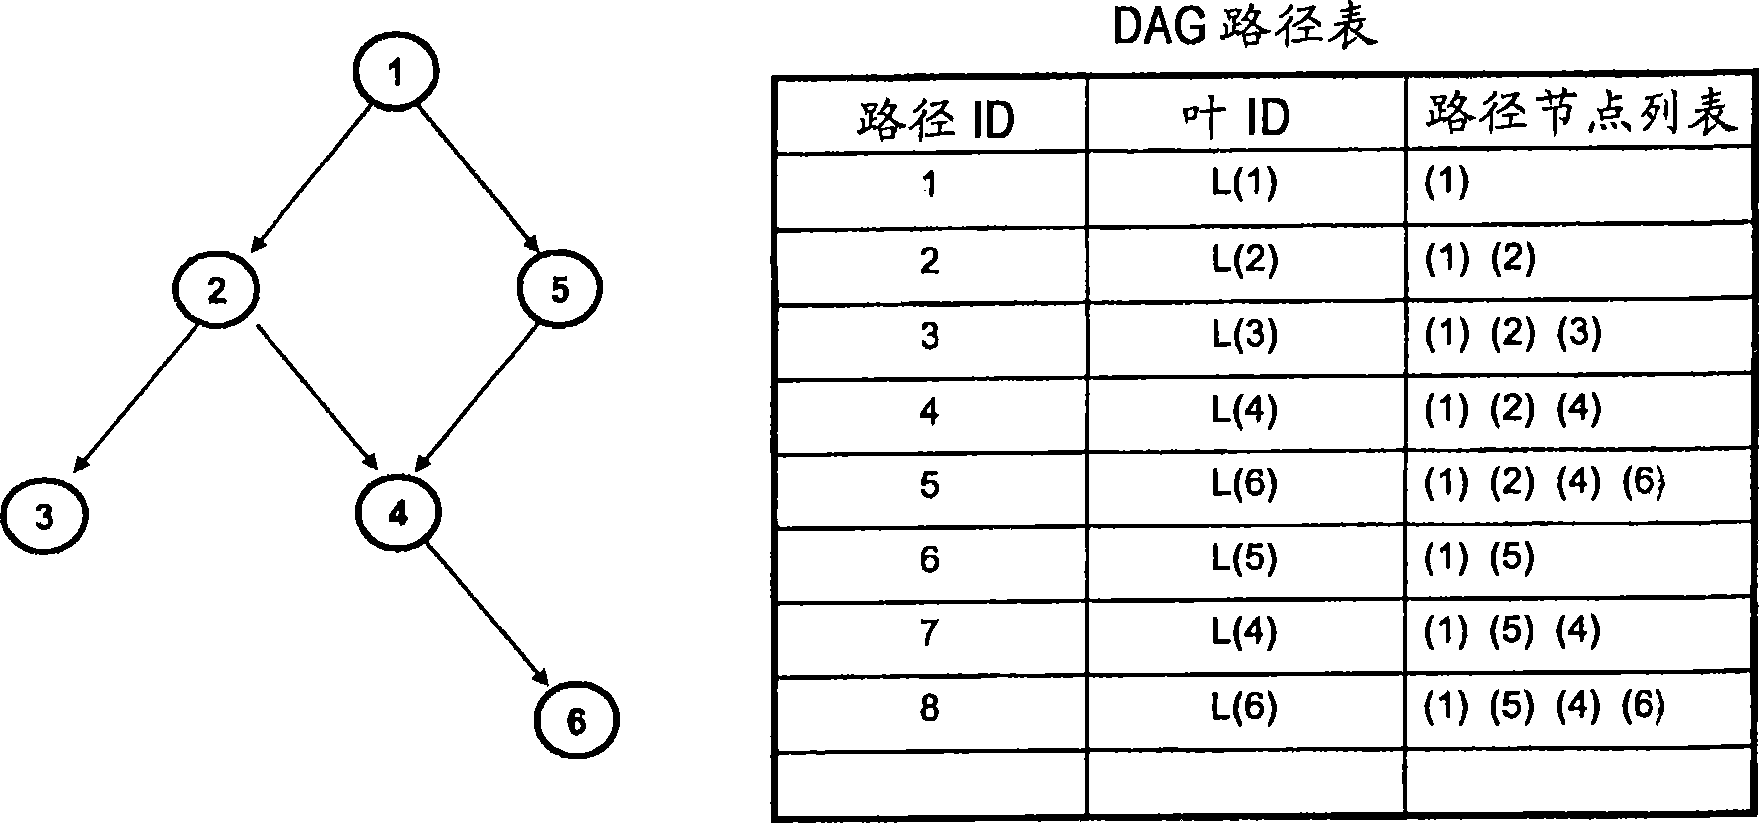 System and method of efficiently representing and searching directed acyclic graph structures in databases